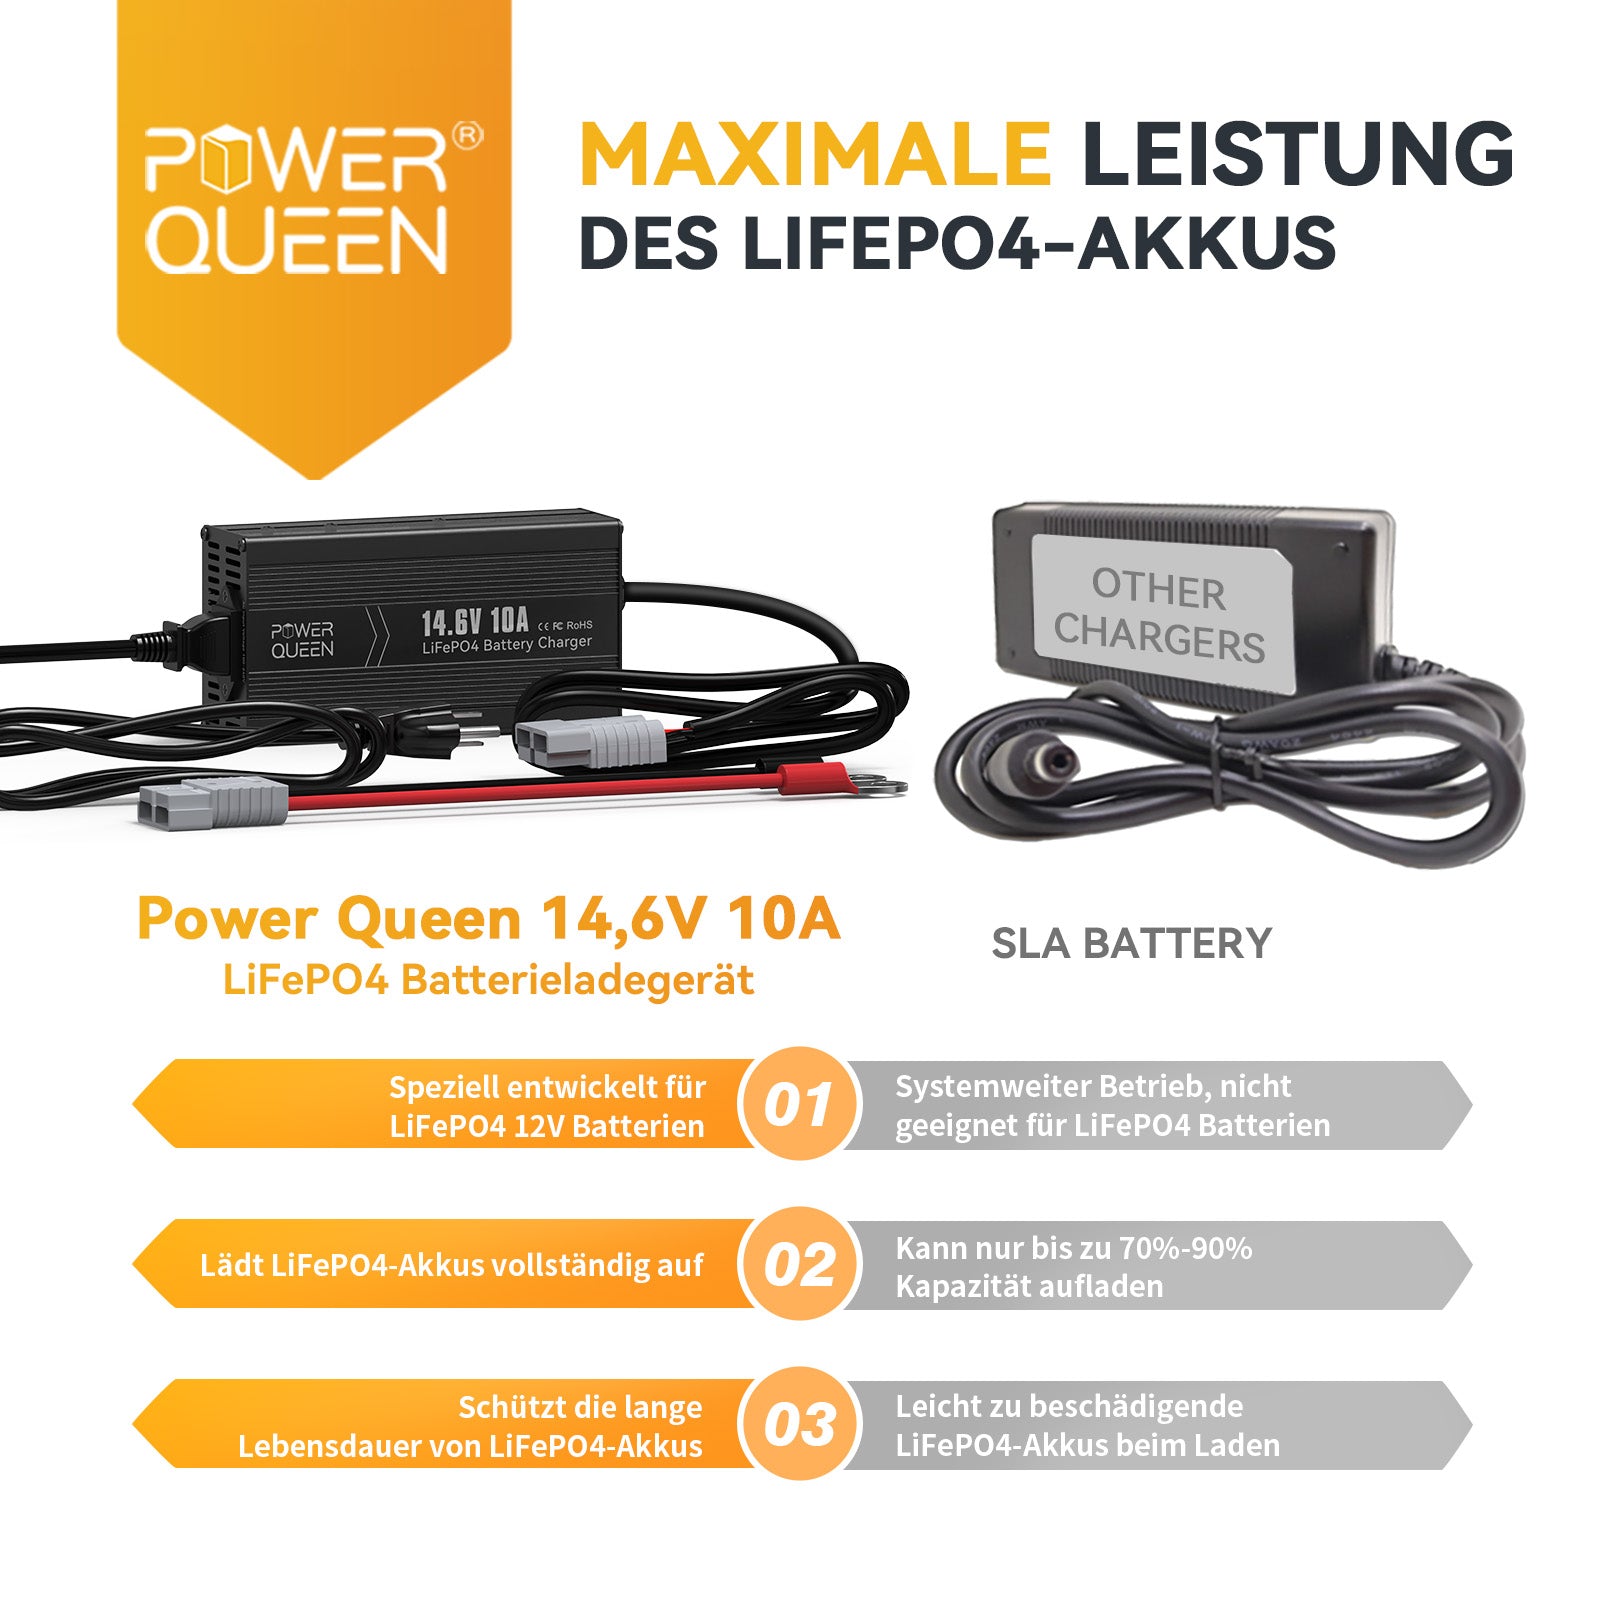 Power Queen 14,6V 10A LiFePO4 oplader voor 12V LiFePO4 accu